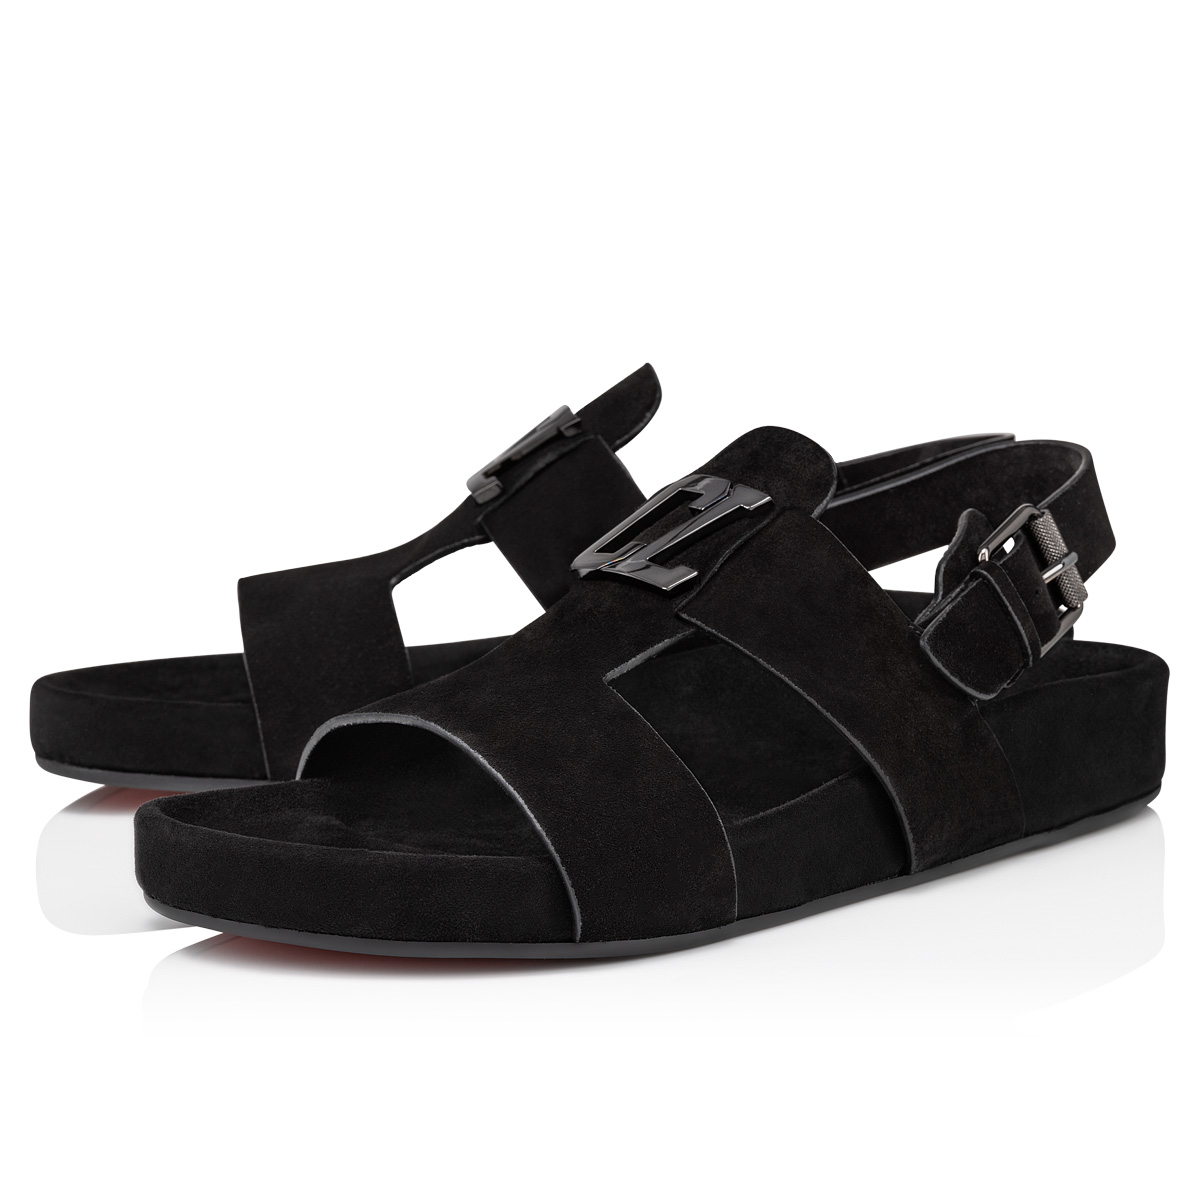 Leather sandals Christian Louboutin Black size 44.5 EU in Leather